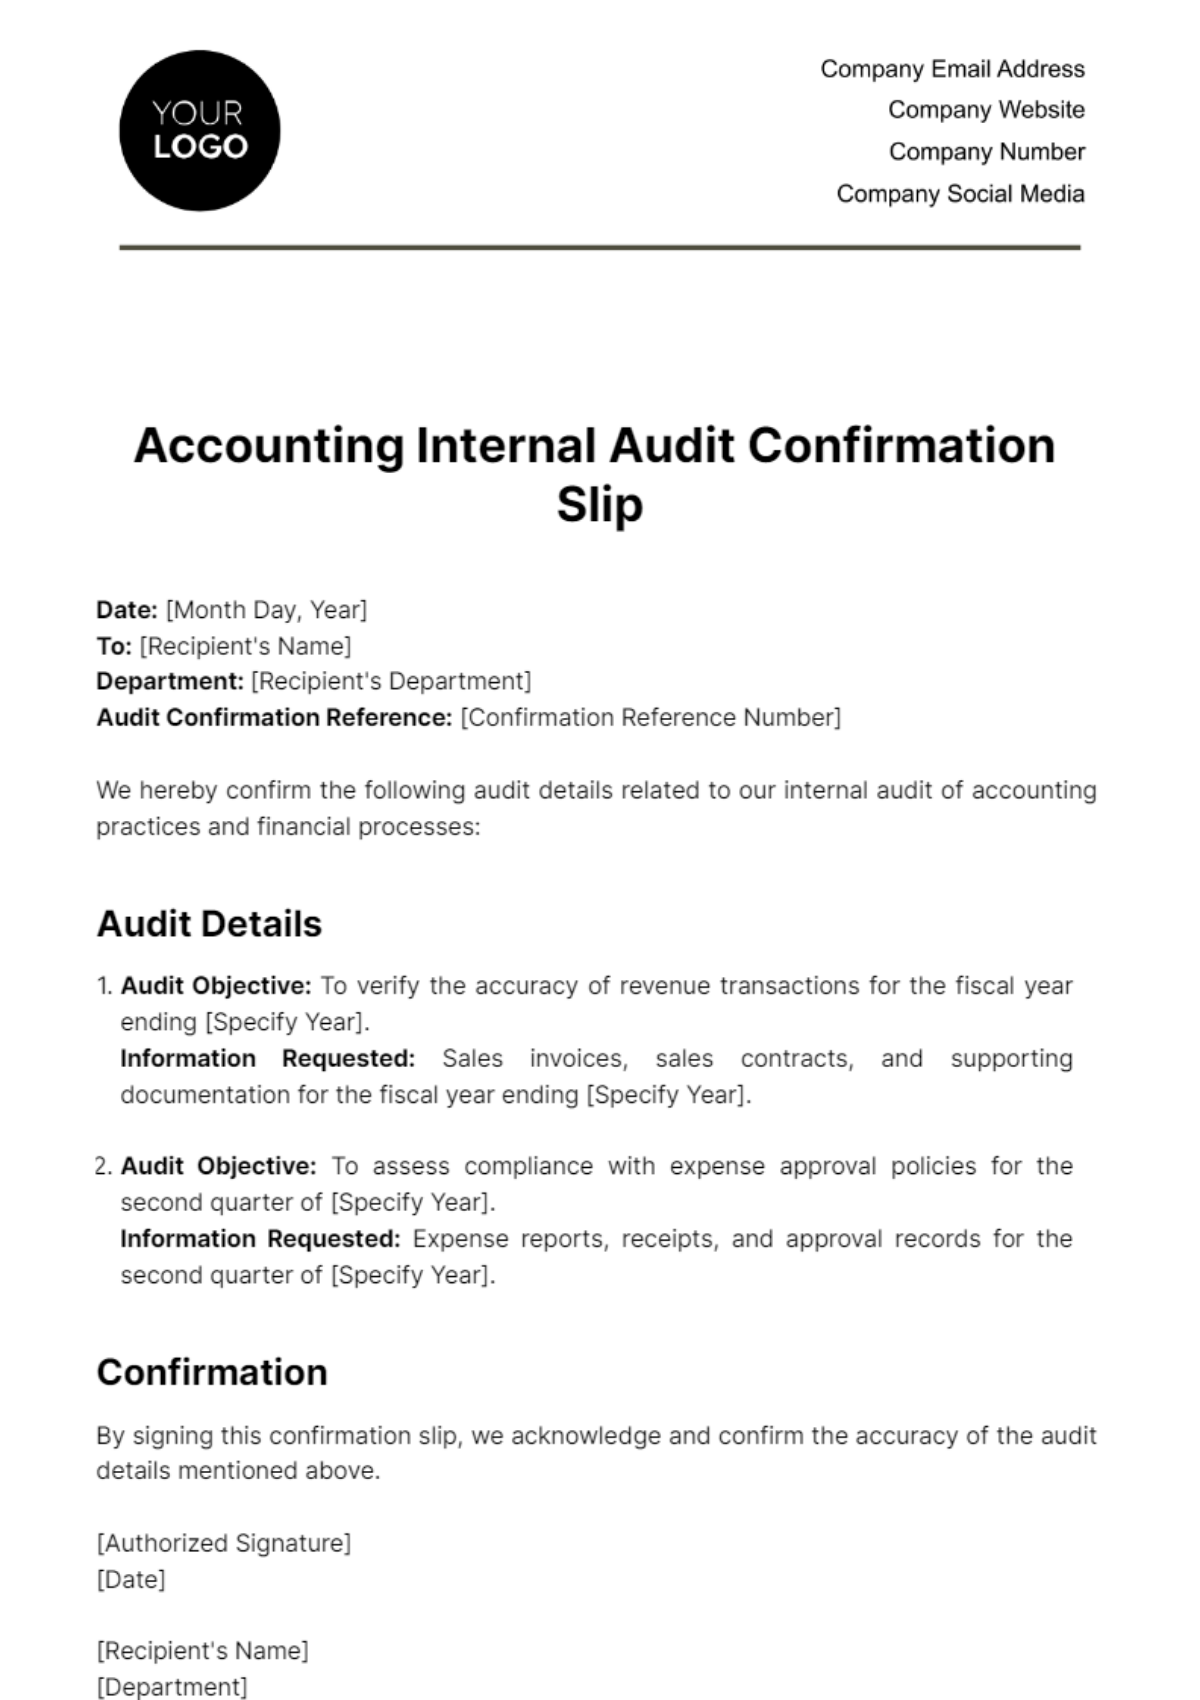 Accounting Internal Audit Confirmation Slip Template